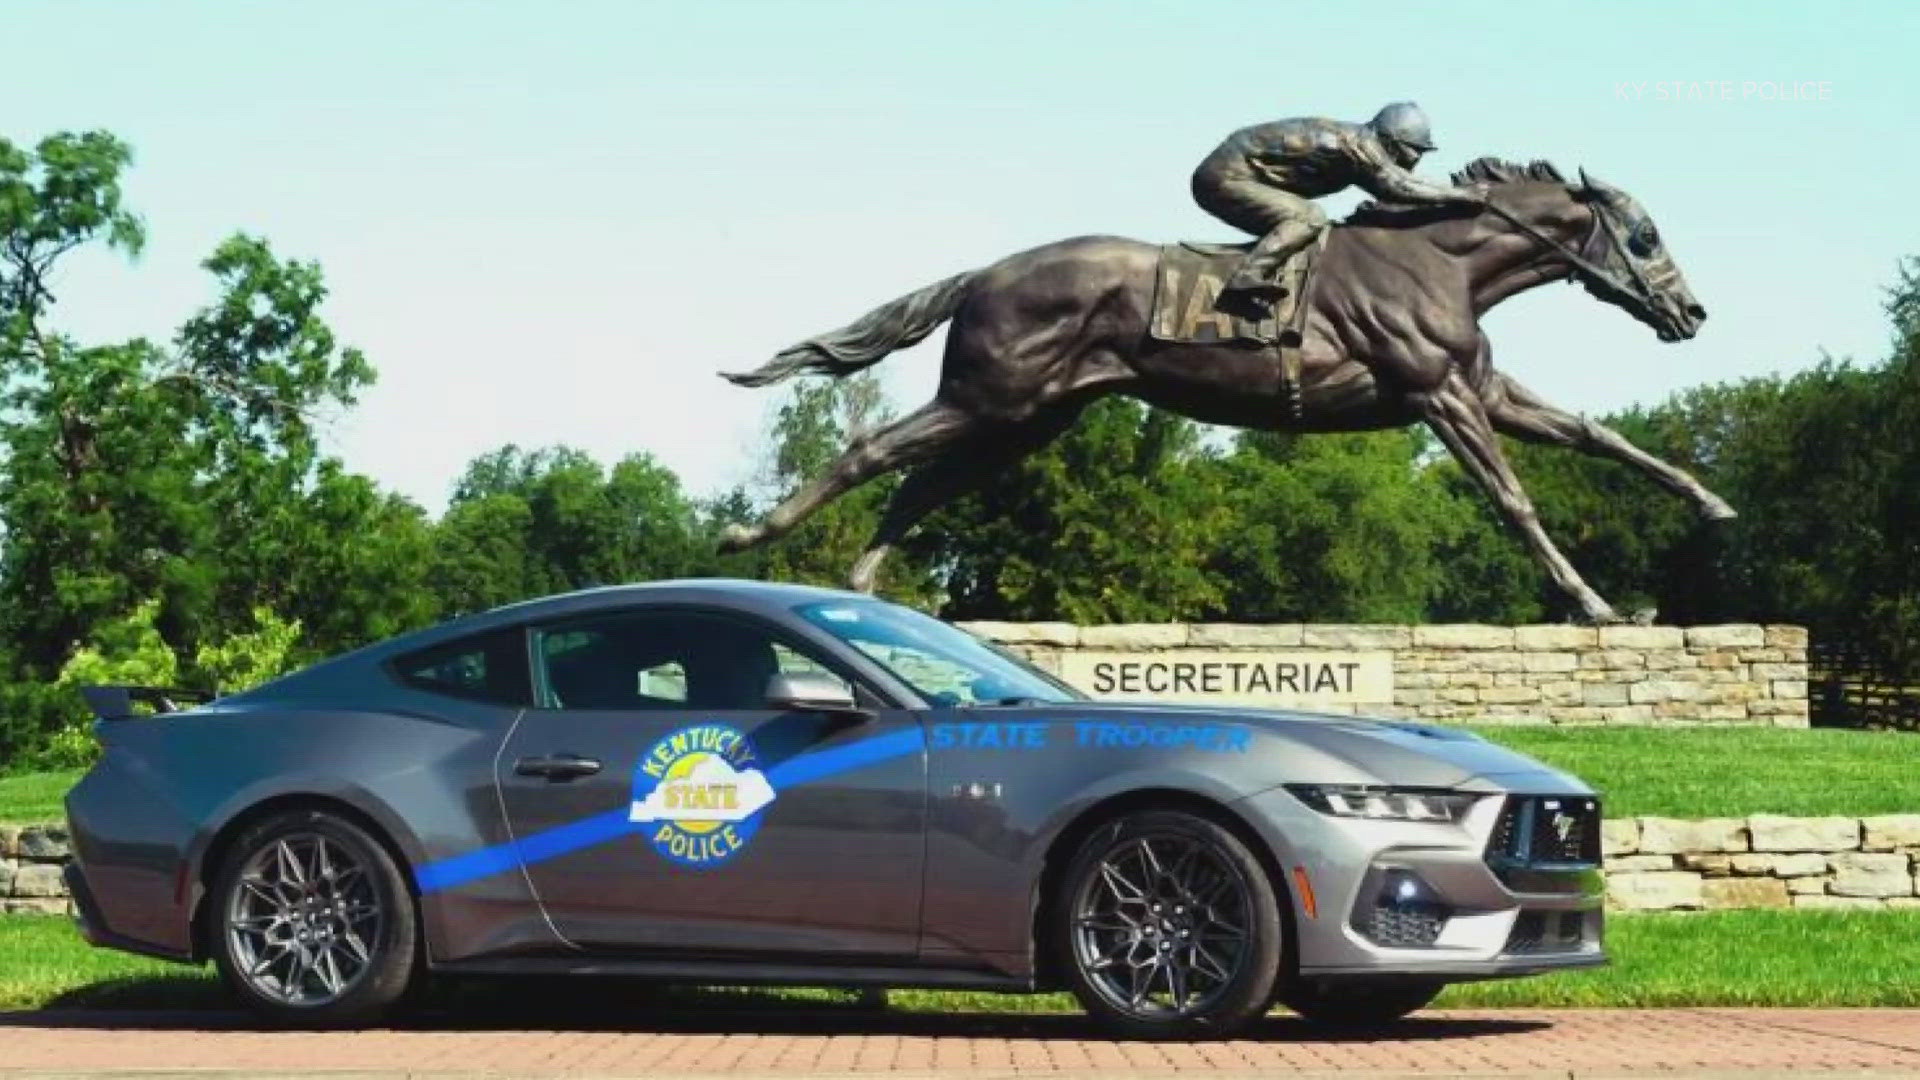 KSP said this year's photo celebrates the state's horse industry and features a 2024 Ford Mustang GT in front of a Secretariat statue.